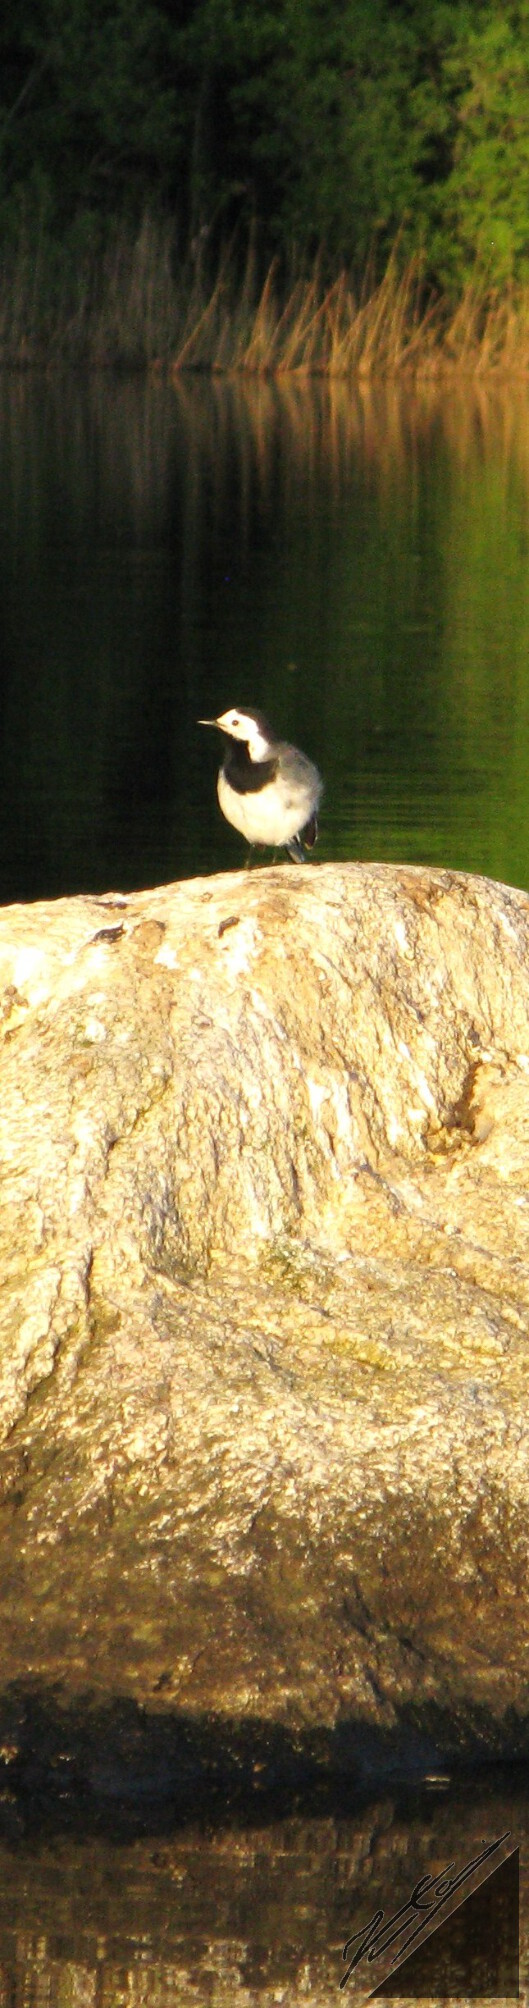 A white wagtail on a rock